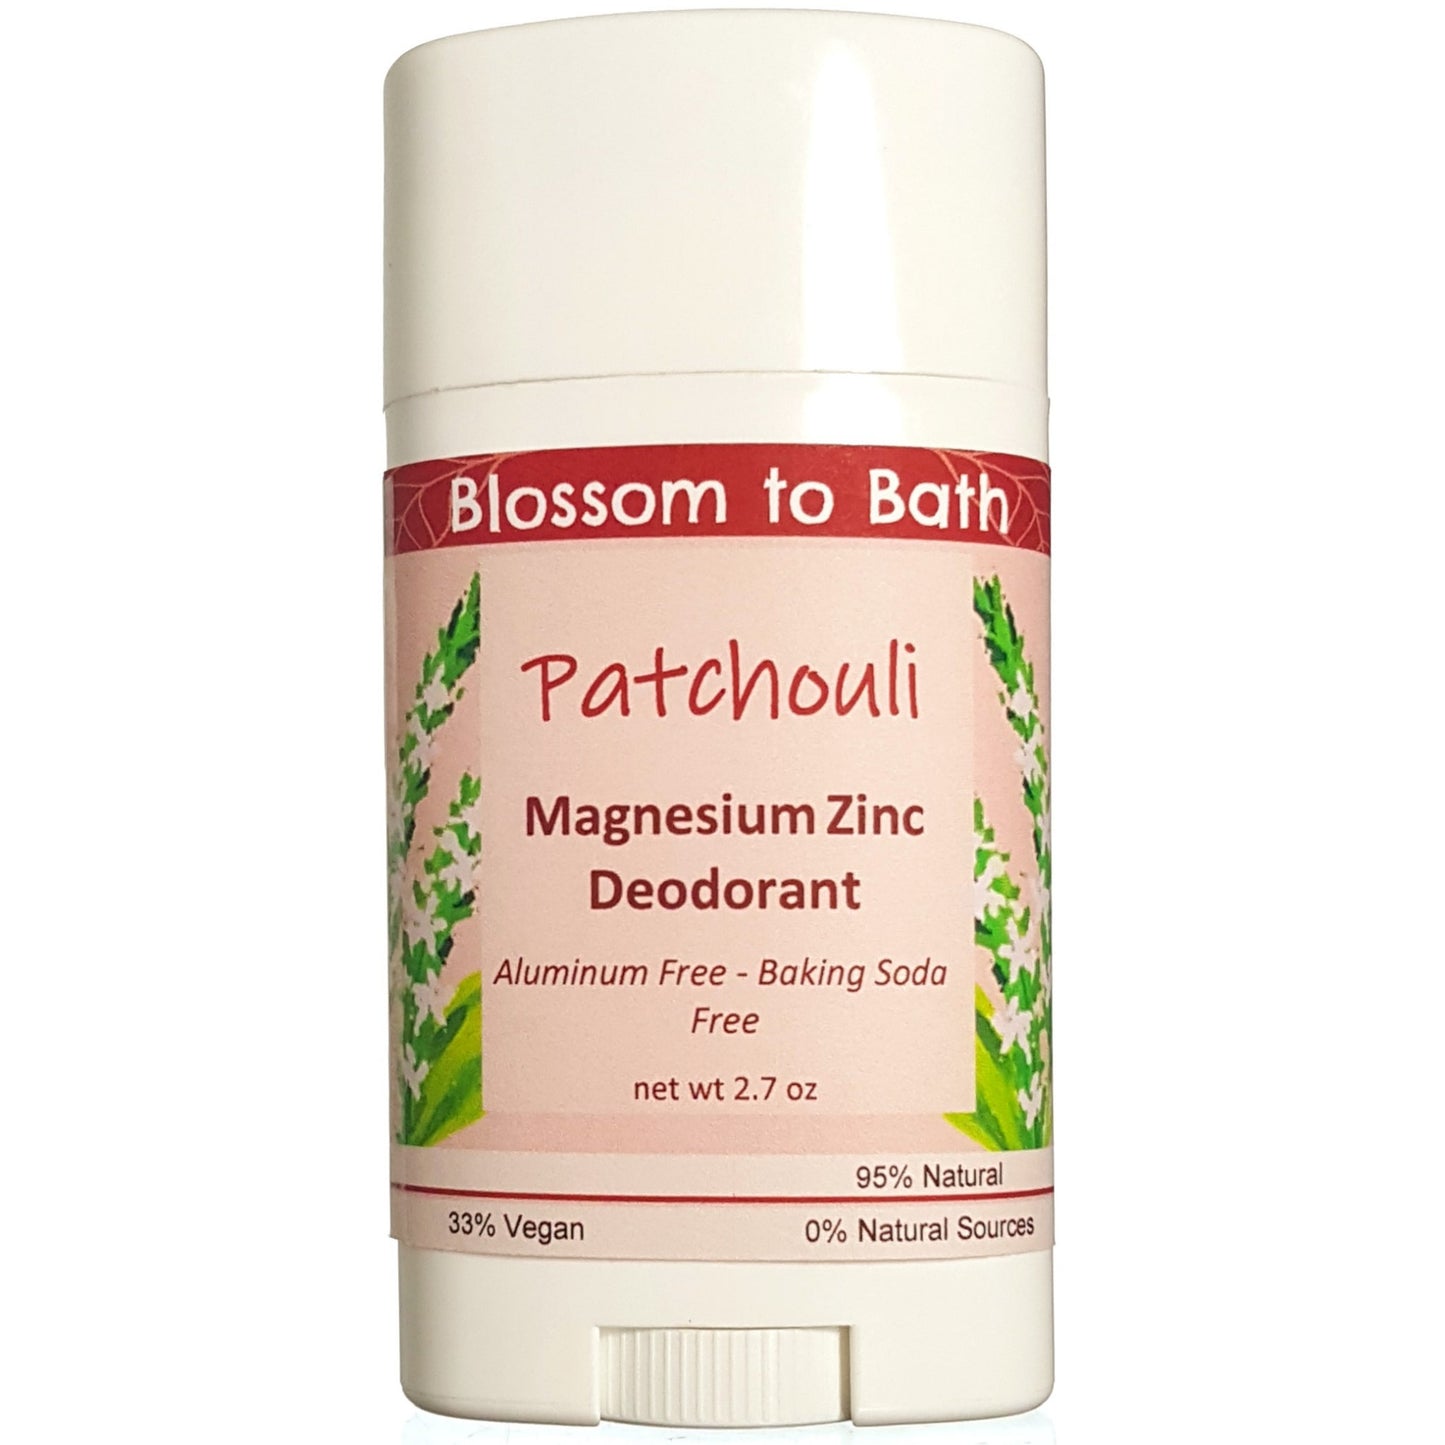 Buy Blossom to Bath Patchouli Magnesium Zinc Deodorant from Flowersong Soap Studio.  Long lasting protection made from organic botanicals and butters, made without baking soda, tested in the Arizona heat  The pure earthy, woody, spicy scent of straight Patchouli.